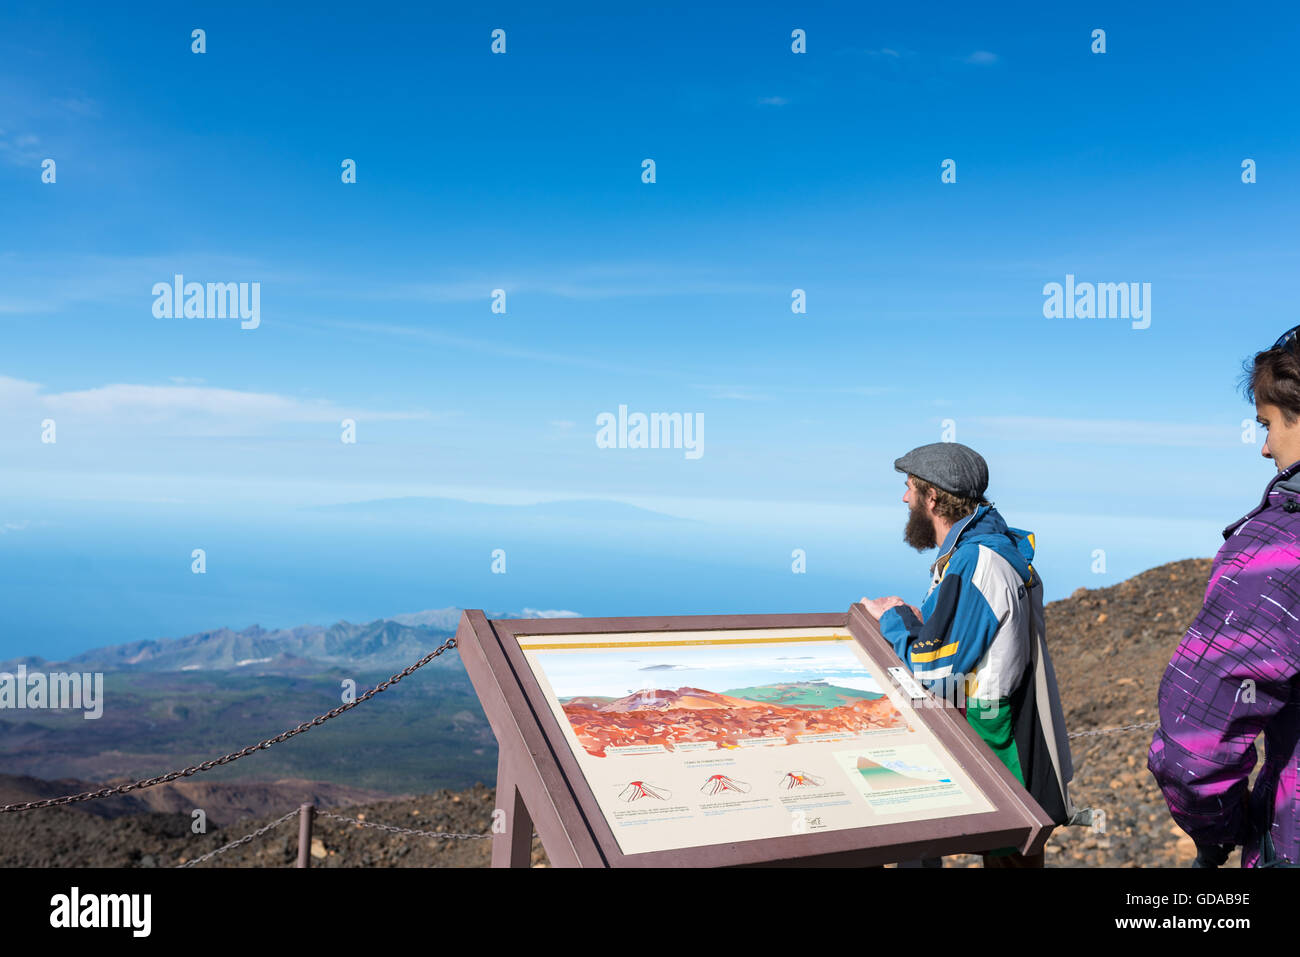 Spain, Canary Islands, Tenerife, hike on the Picp del Teide. The Pico del Teide (Teyde) is with 3718 m the highest elevation on the Canary Island Stock Photo